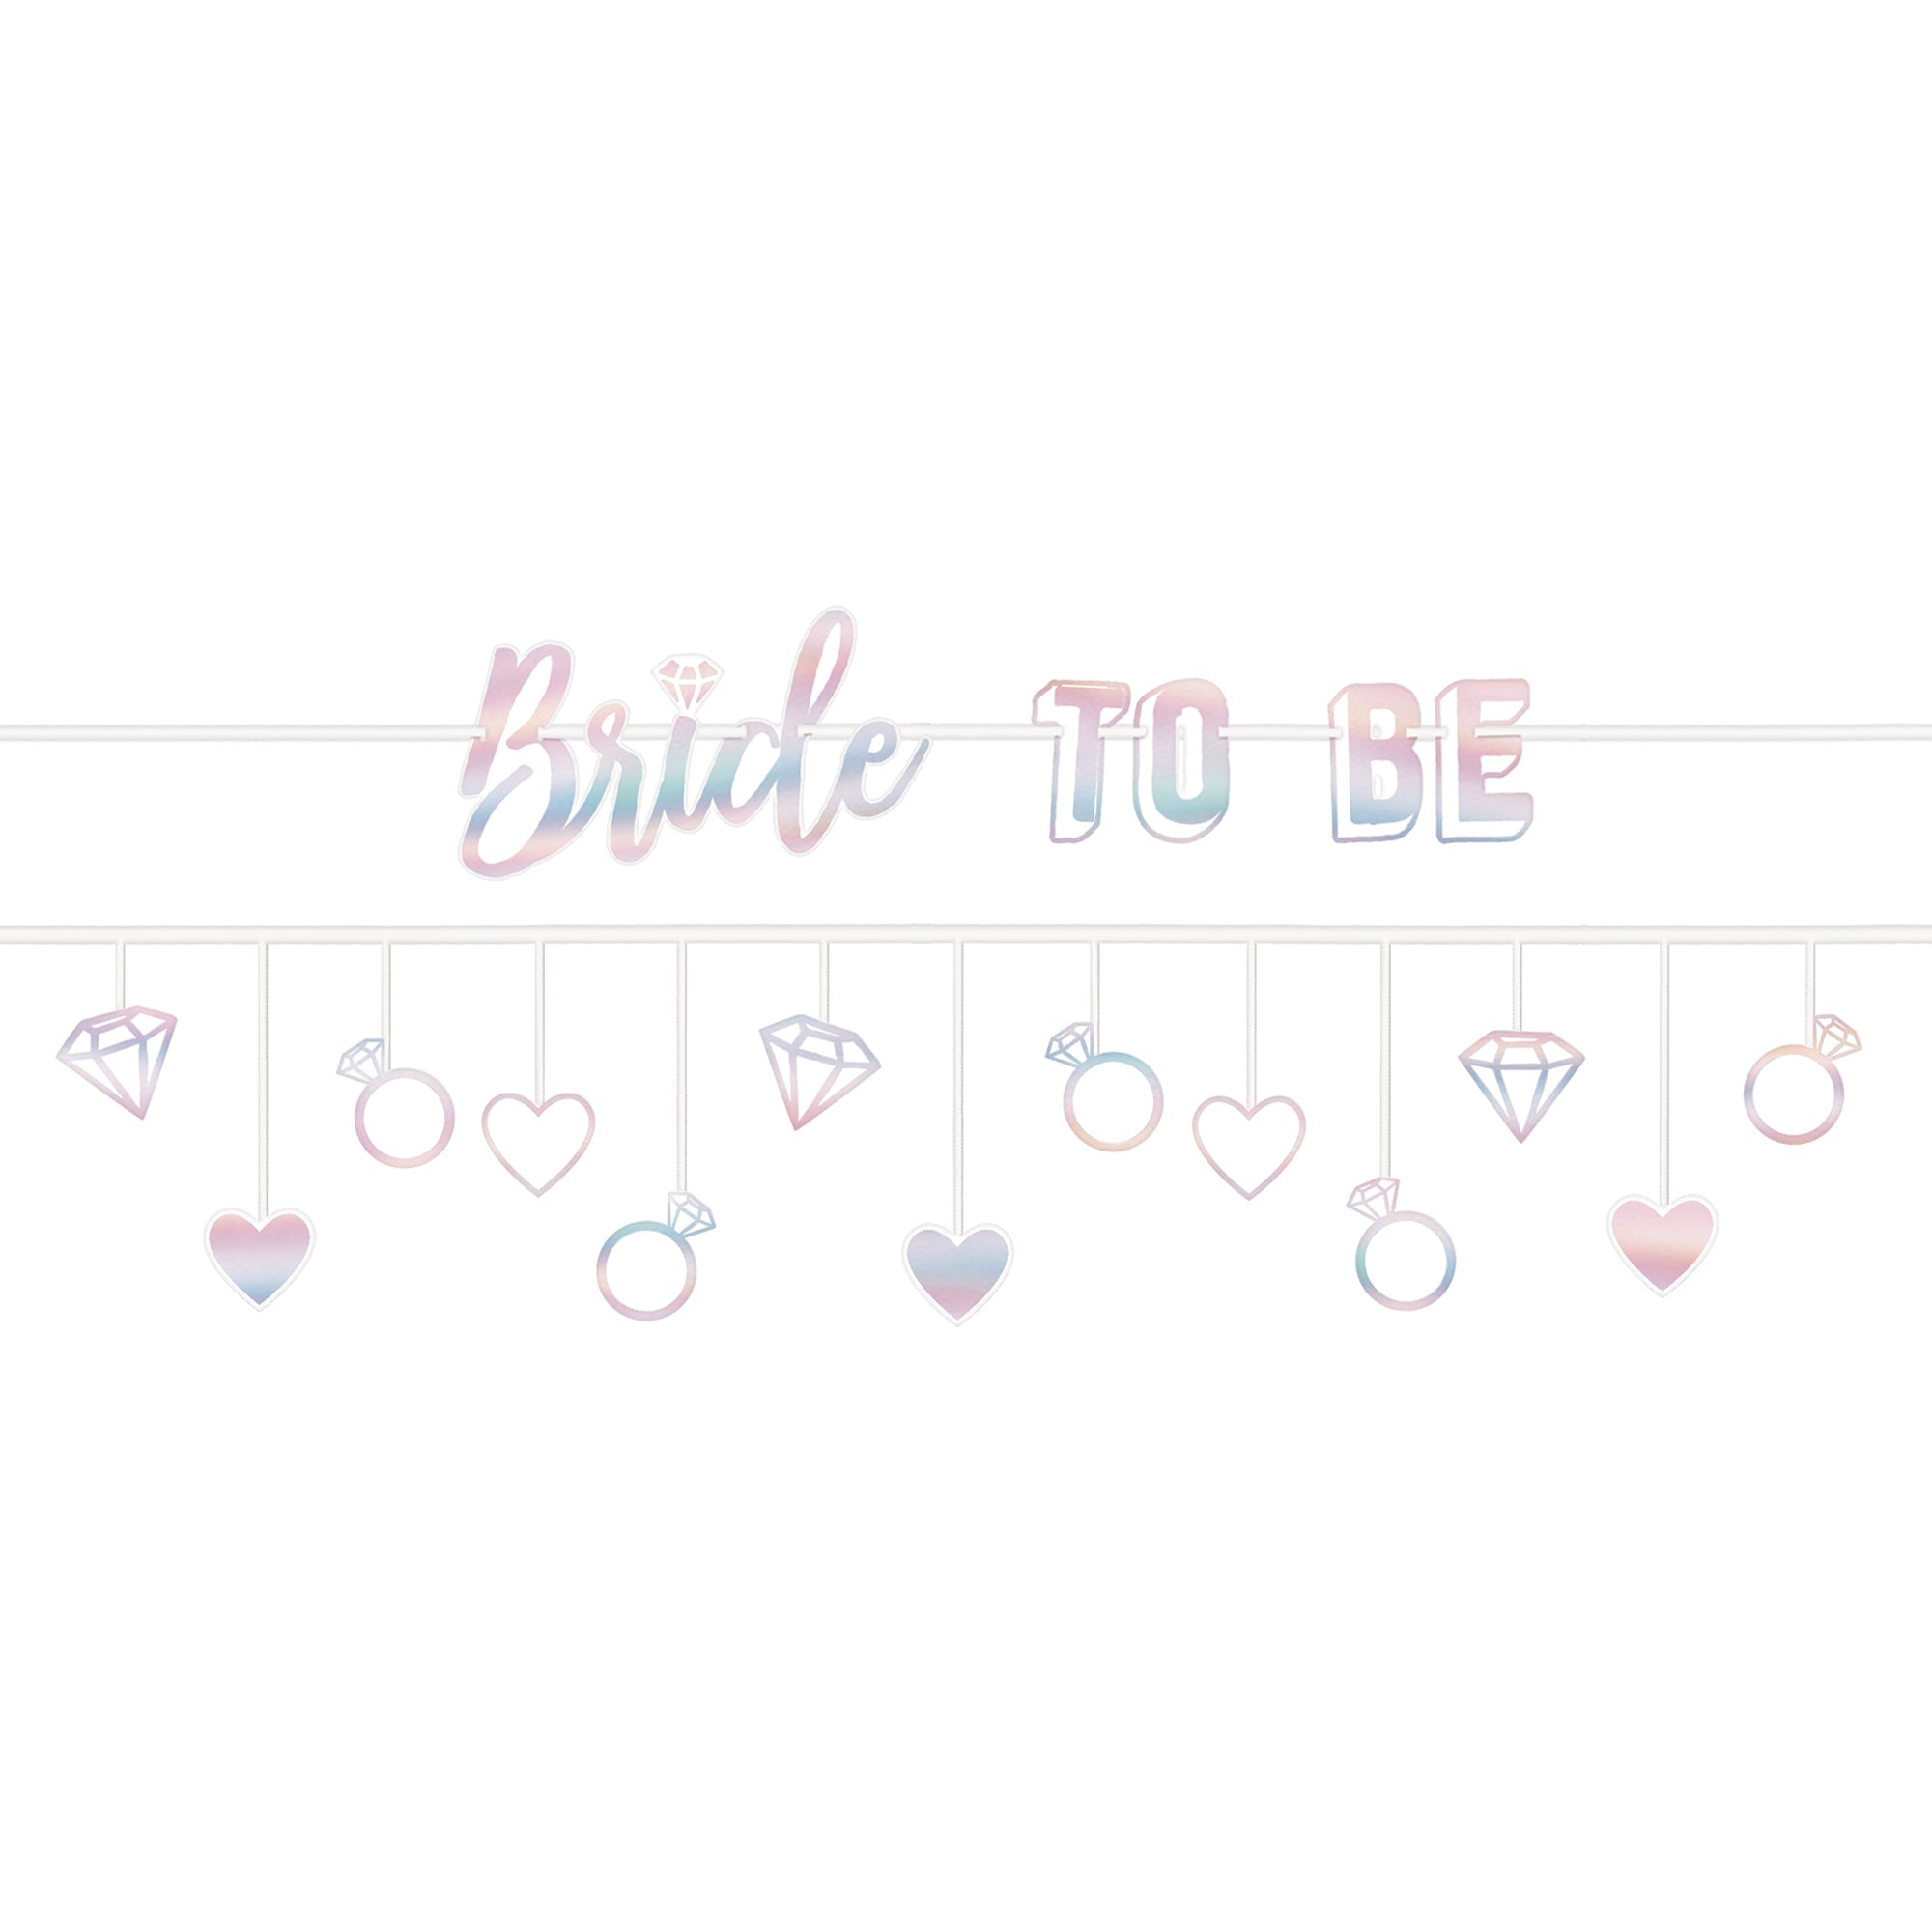 Bride To Be 2 pc Banner set 1 banner, 12' x 5 1/2" with caption "Bride to Be" and 1 banner with drop down rings,diamonds and hearts 12' x 1 1/2" - 2 1/2"